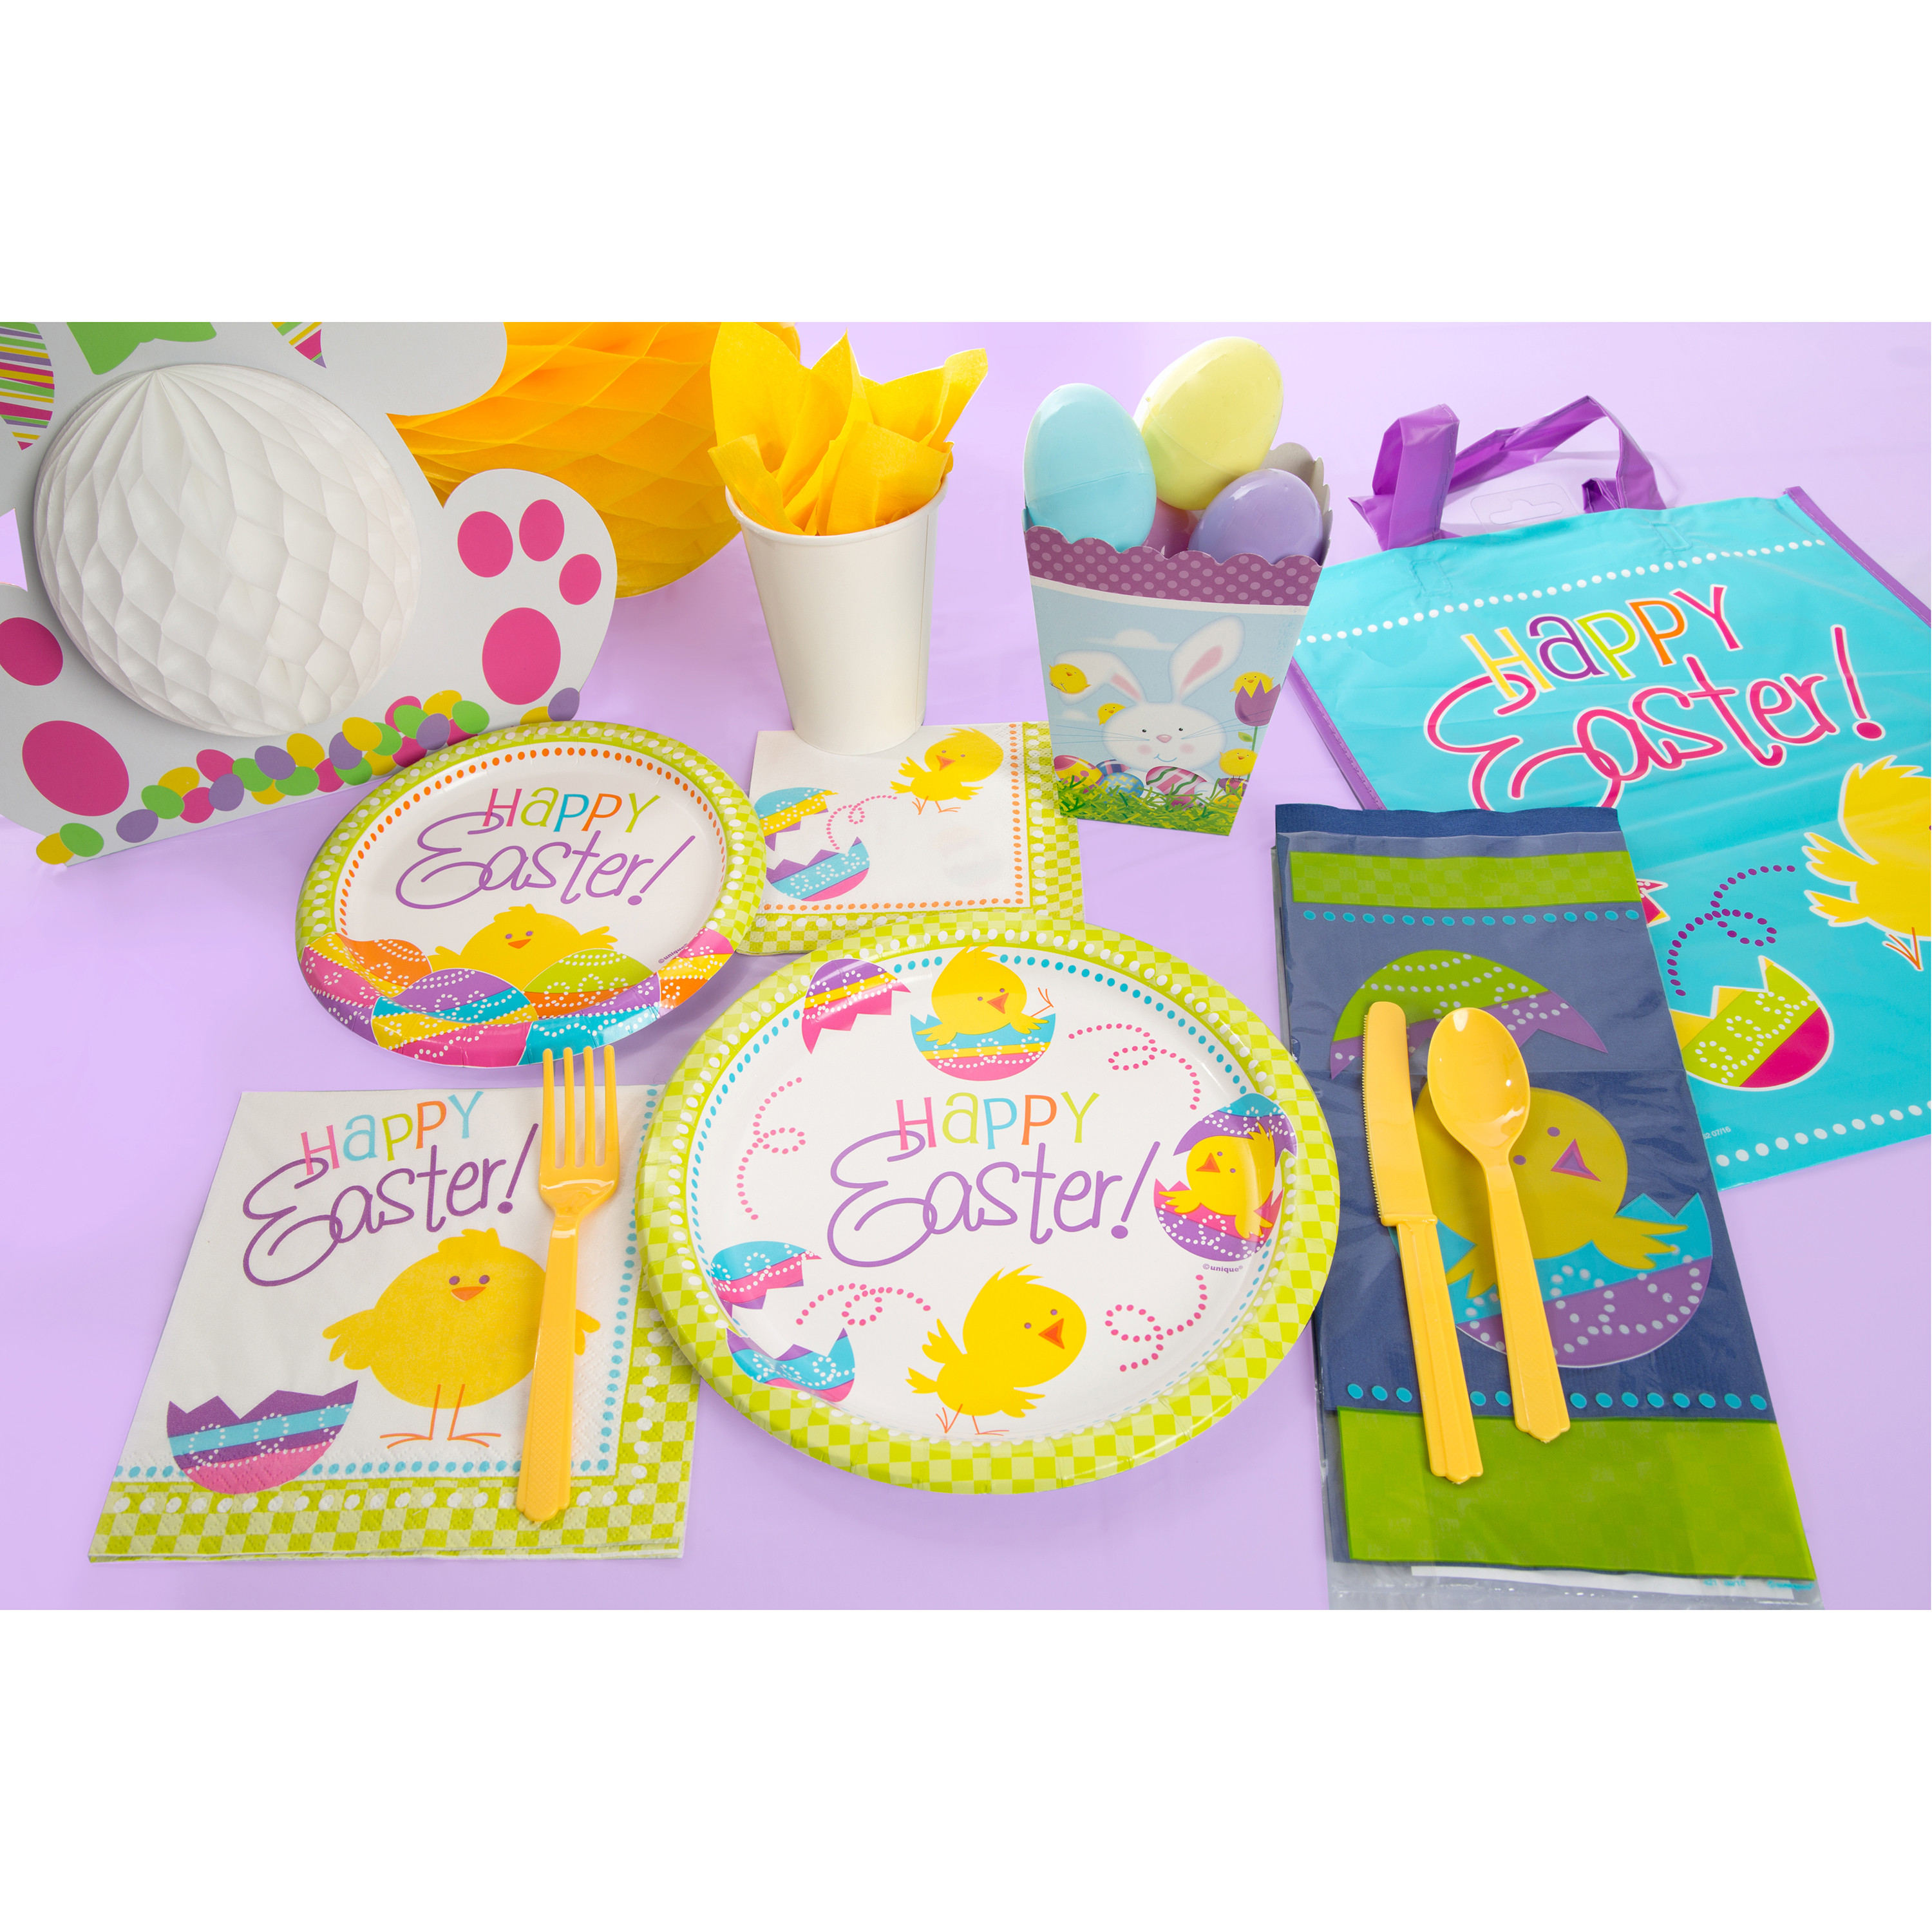 Easter Office Party Ideas
 Easter Chick Party Supplies Walmart